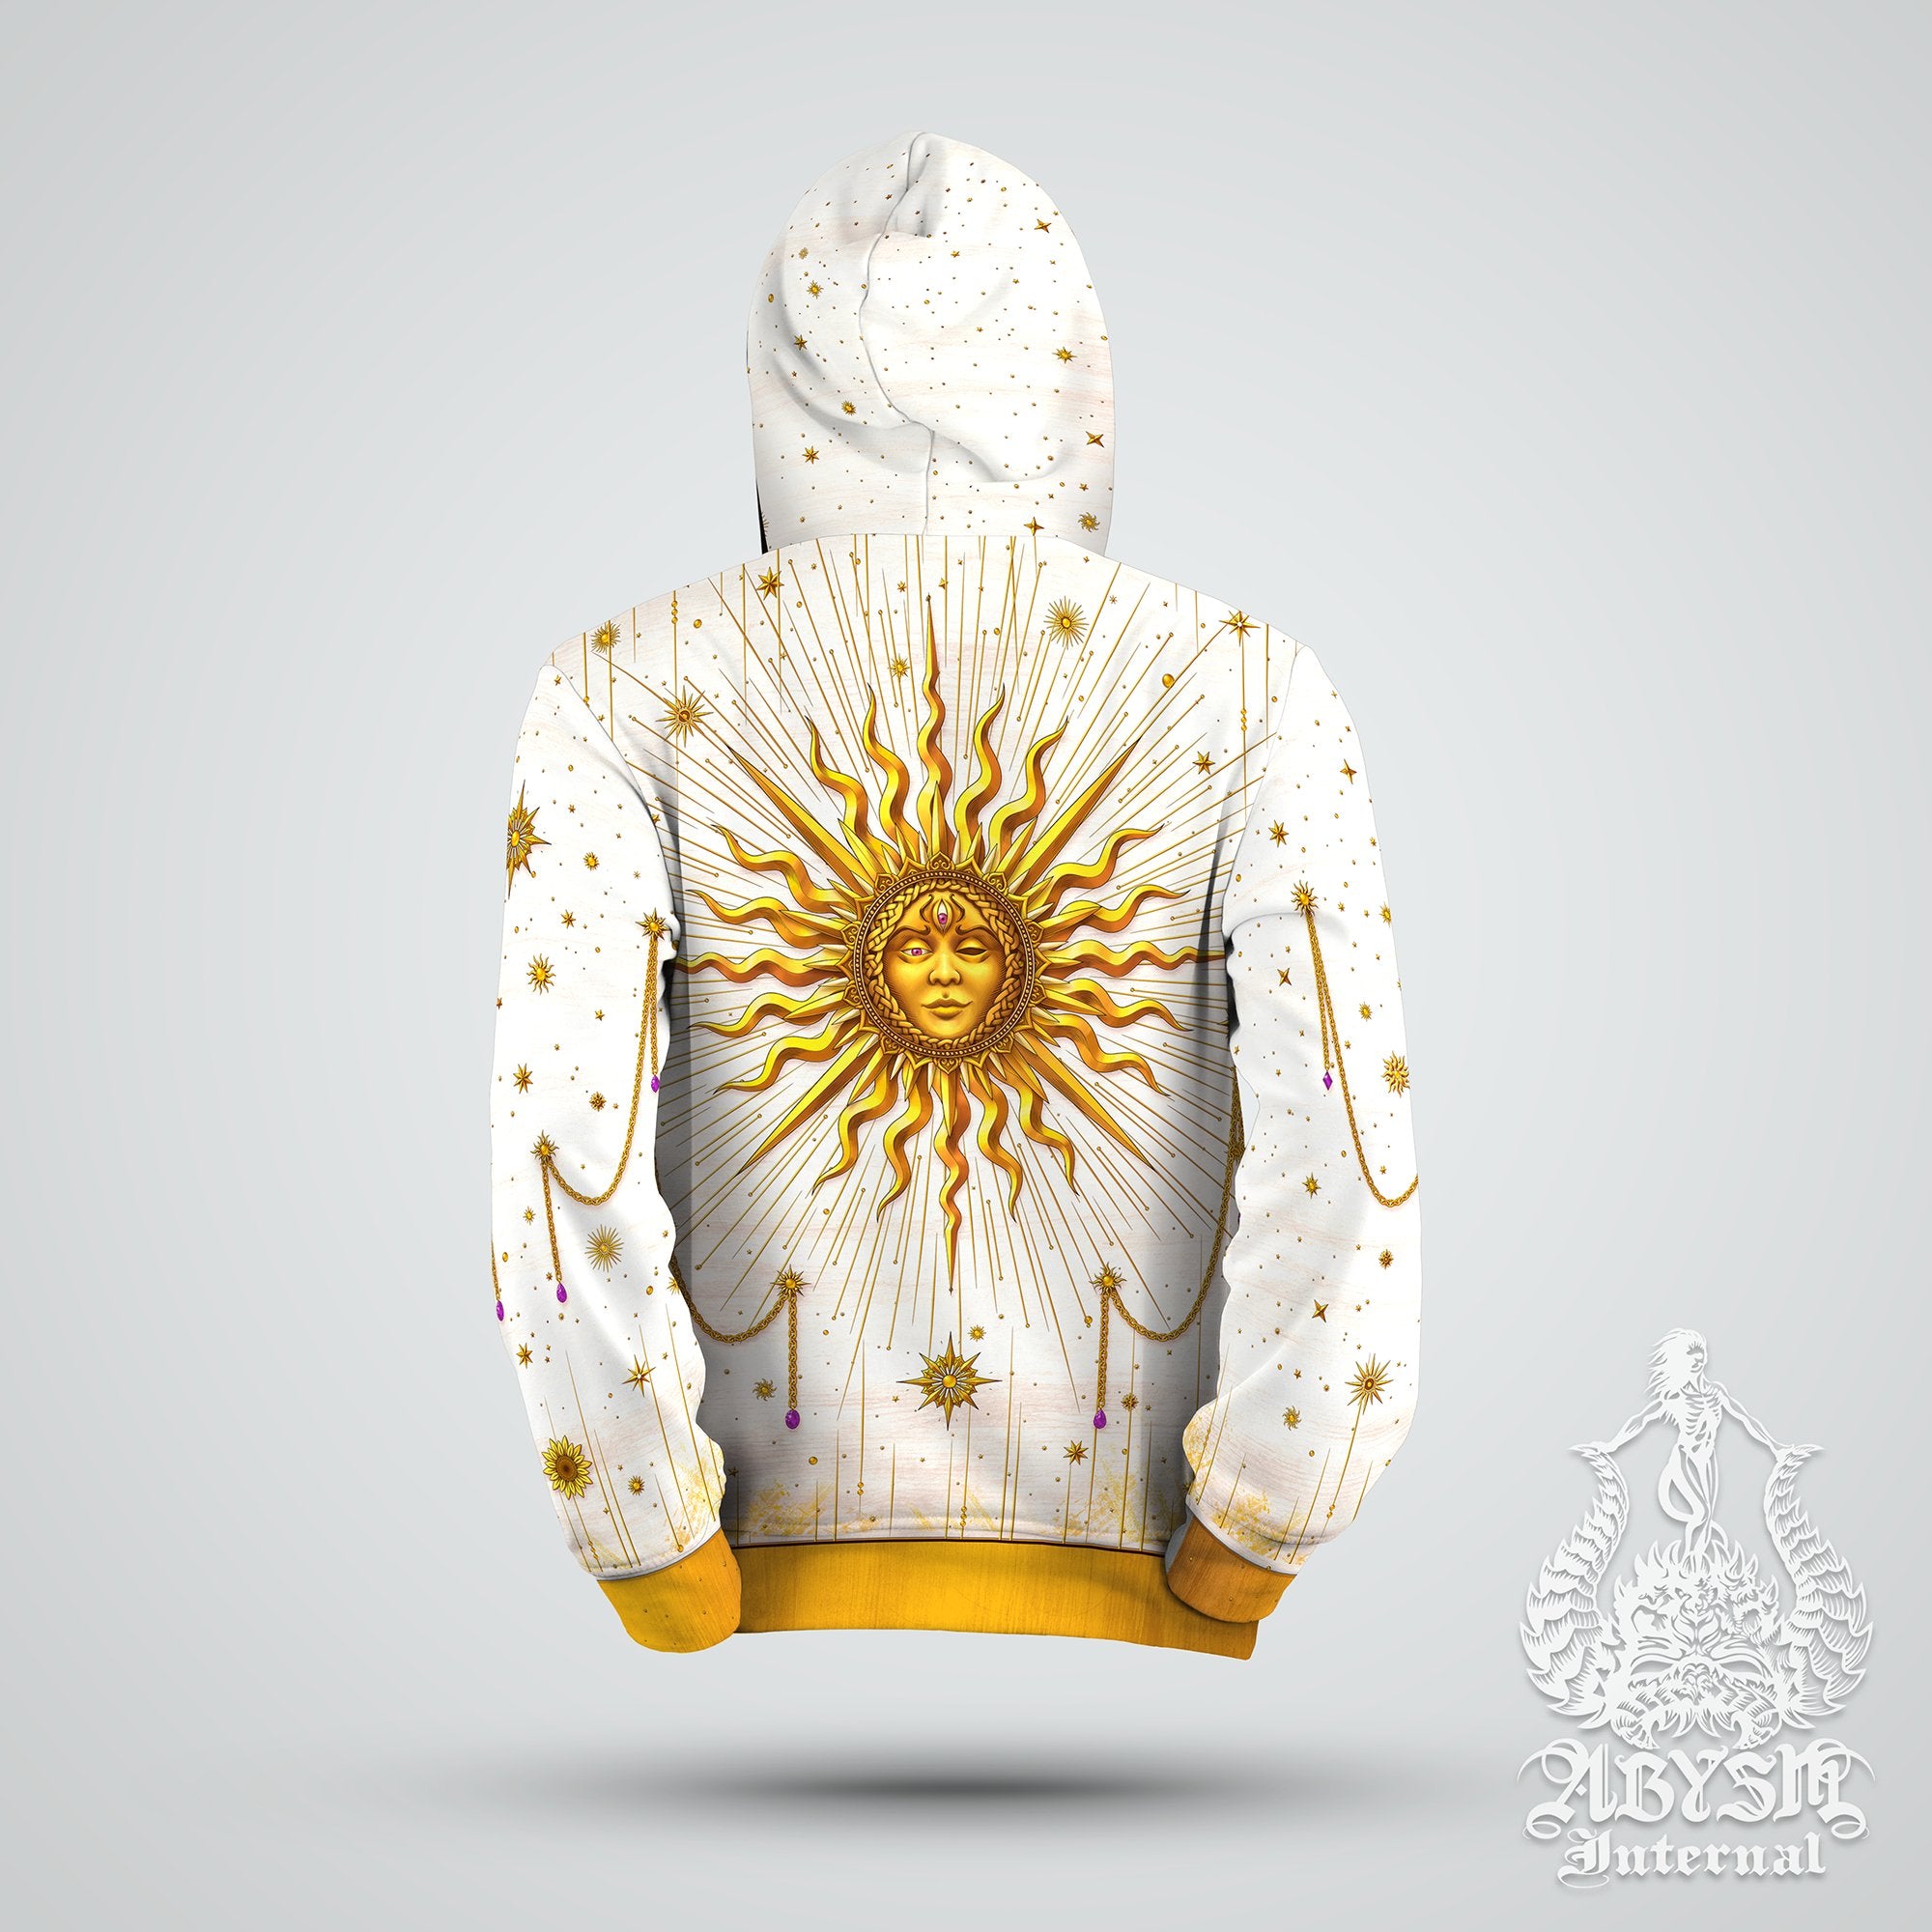 Gold Sun Hoodie, Tarot Arcana Sweater, Indie Pullover, Magic and Esoteric Street Outfit, Positive Streetwear, Flashy Boho Clothing, Unisex - 7 Colors - Abysm Internal